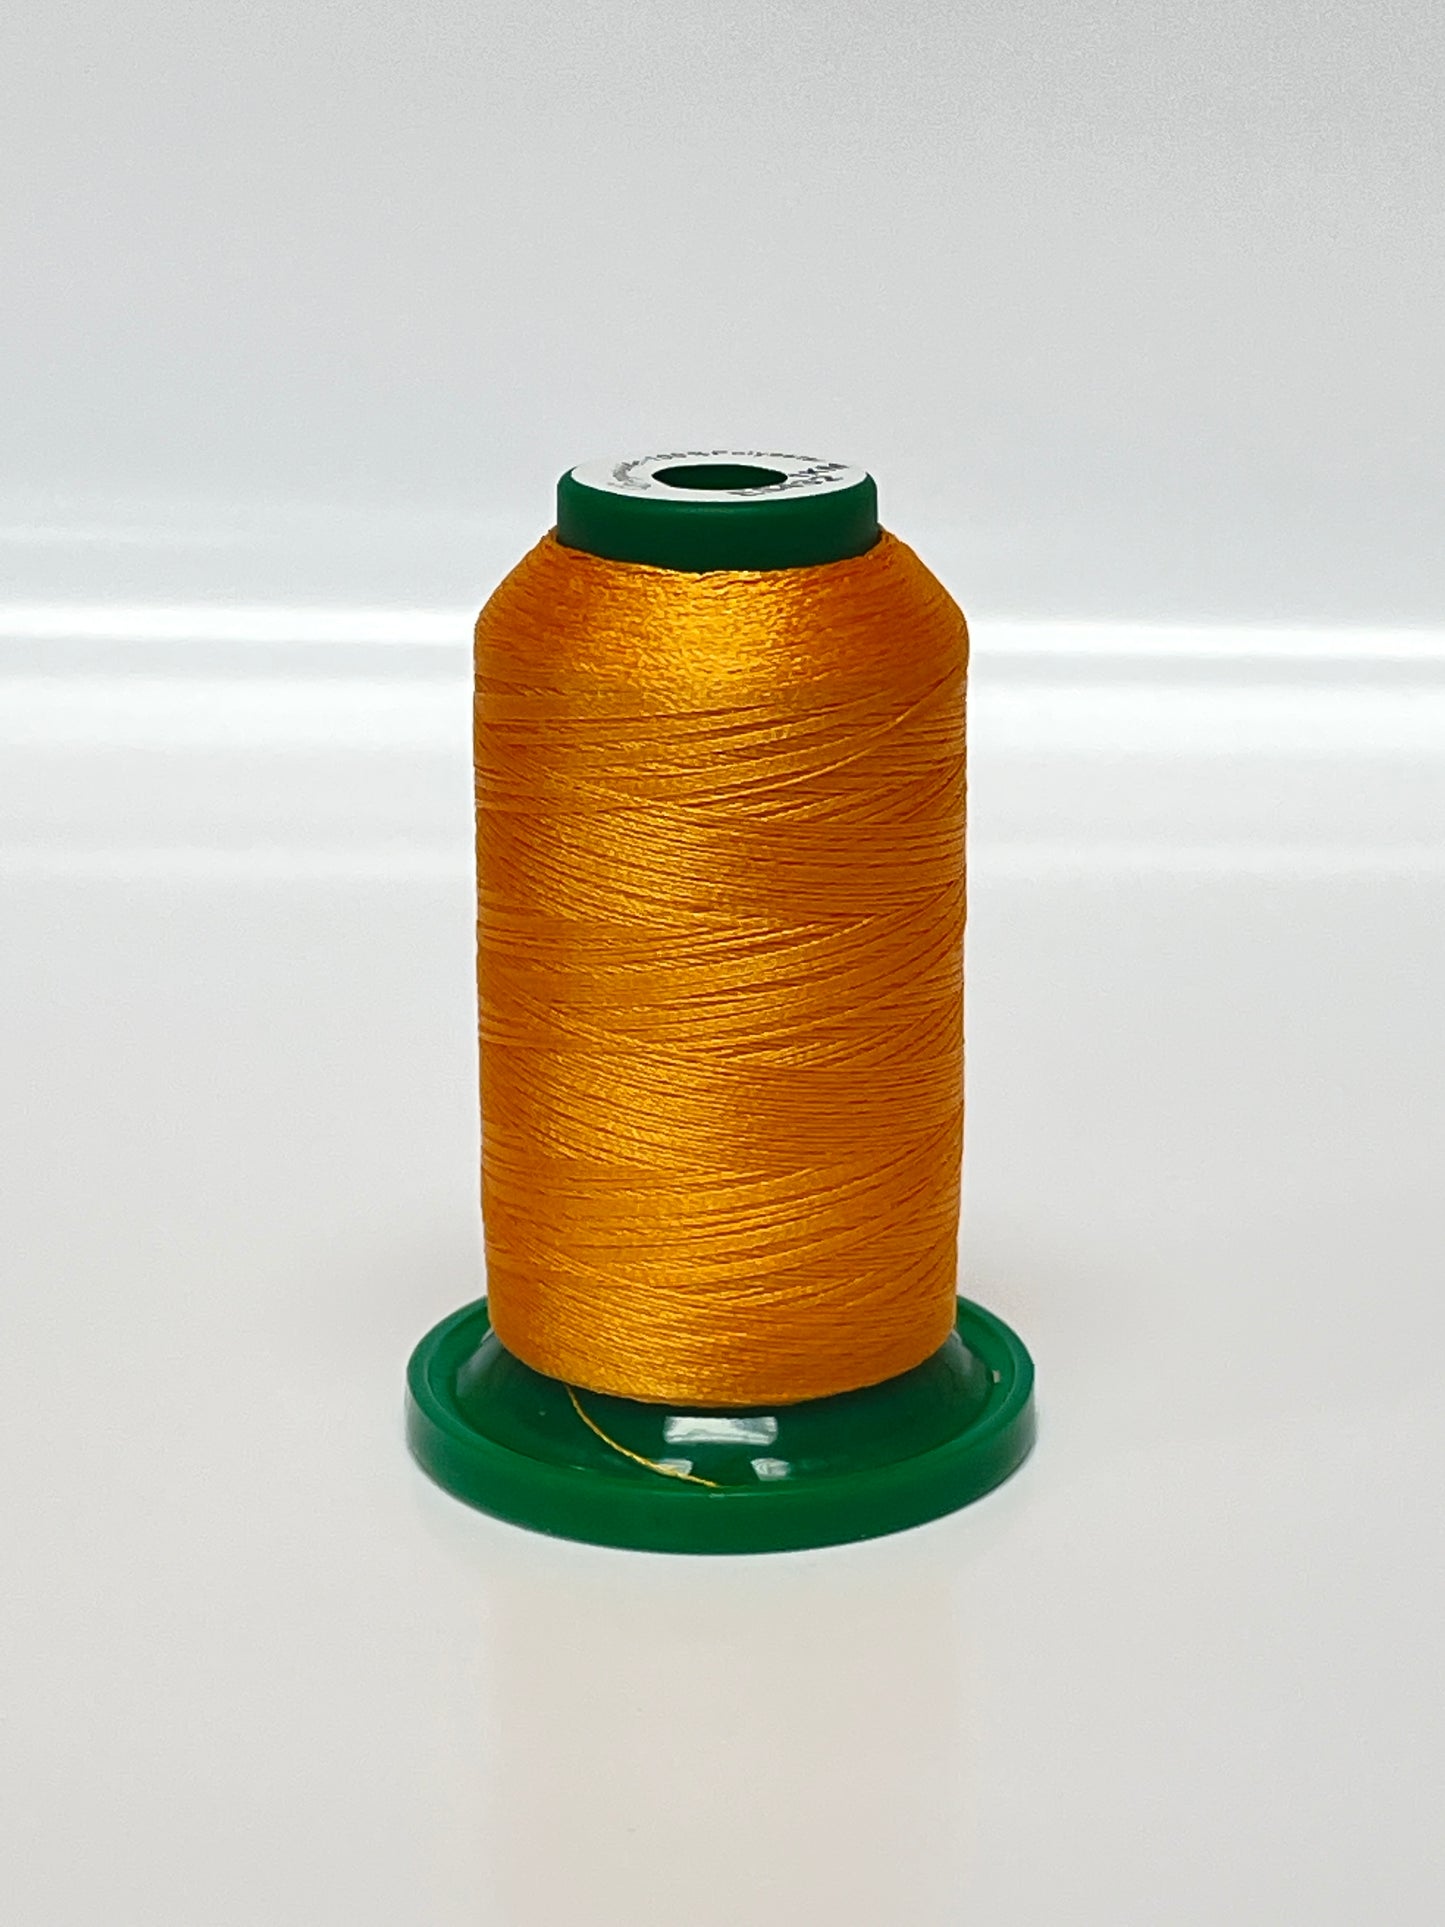 NEW in Plastic Madeira Embroidery Thread Autumn Gold 1173 1500 Yd